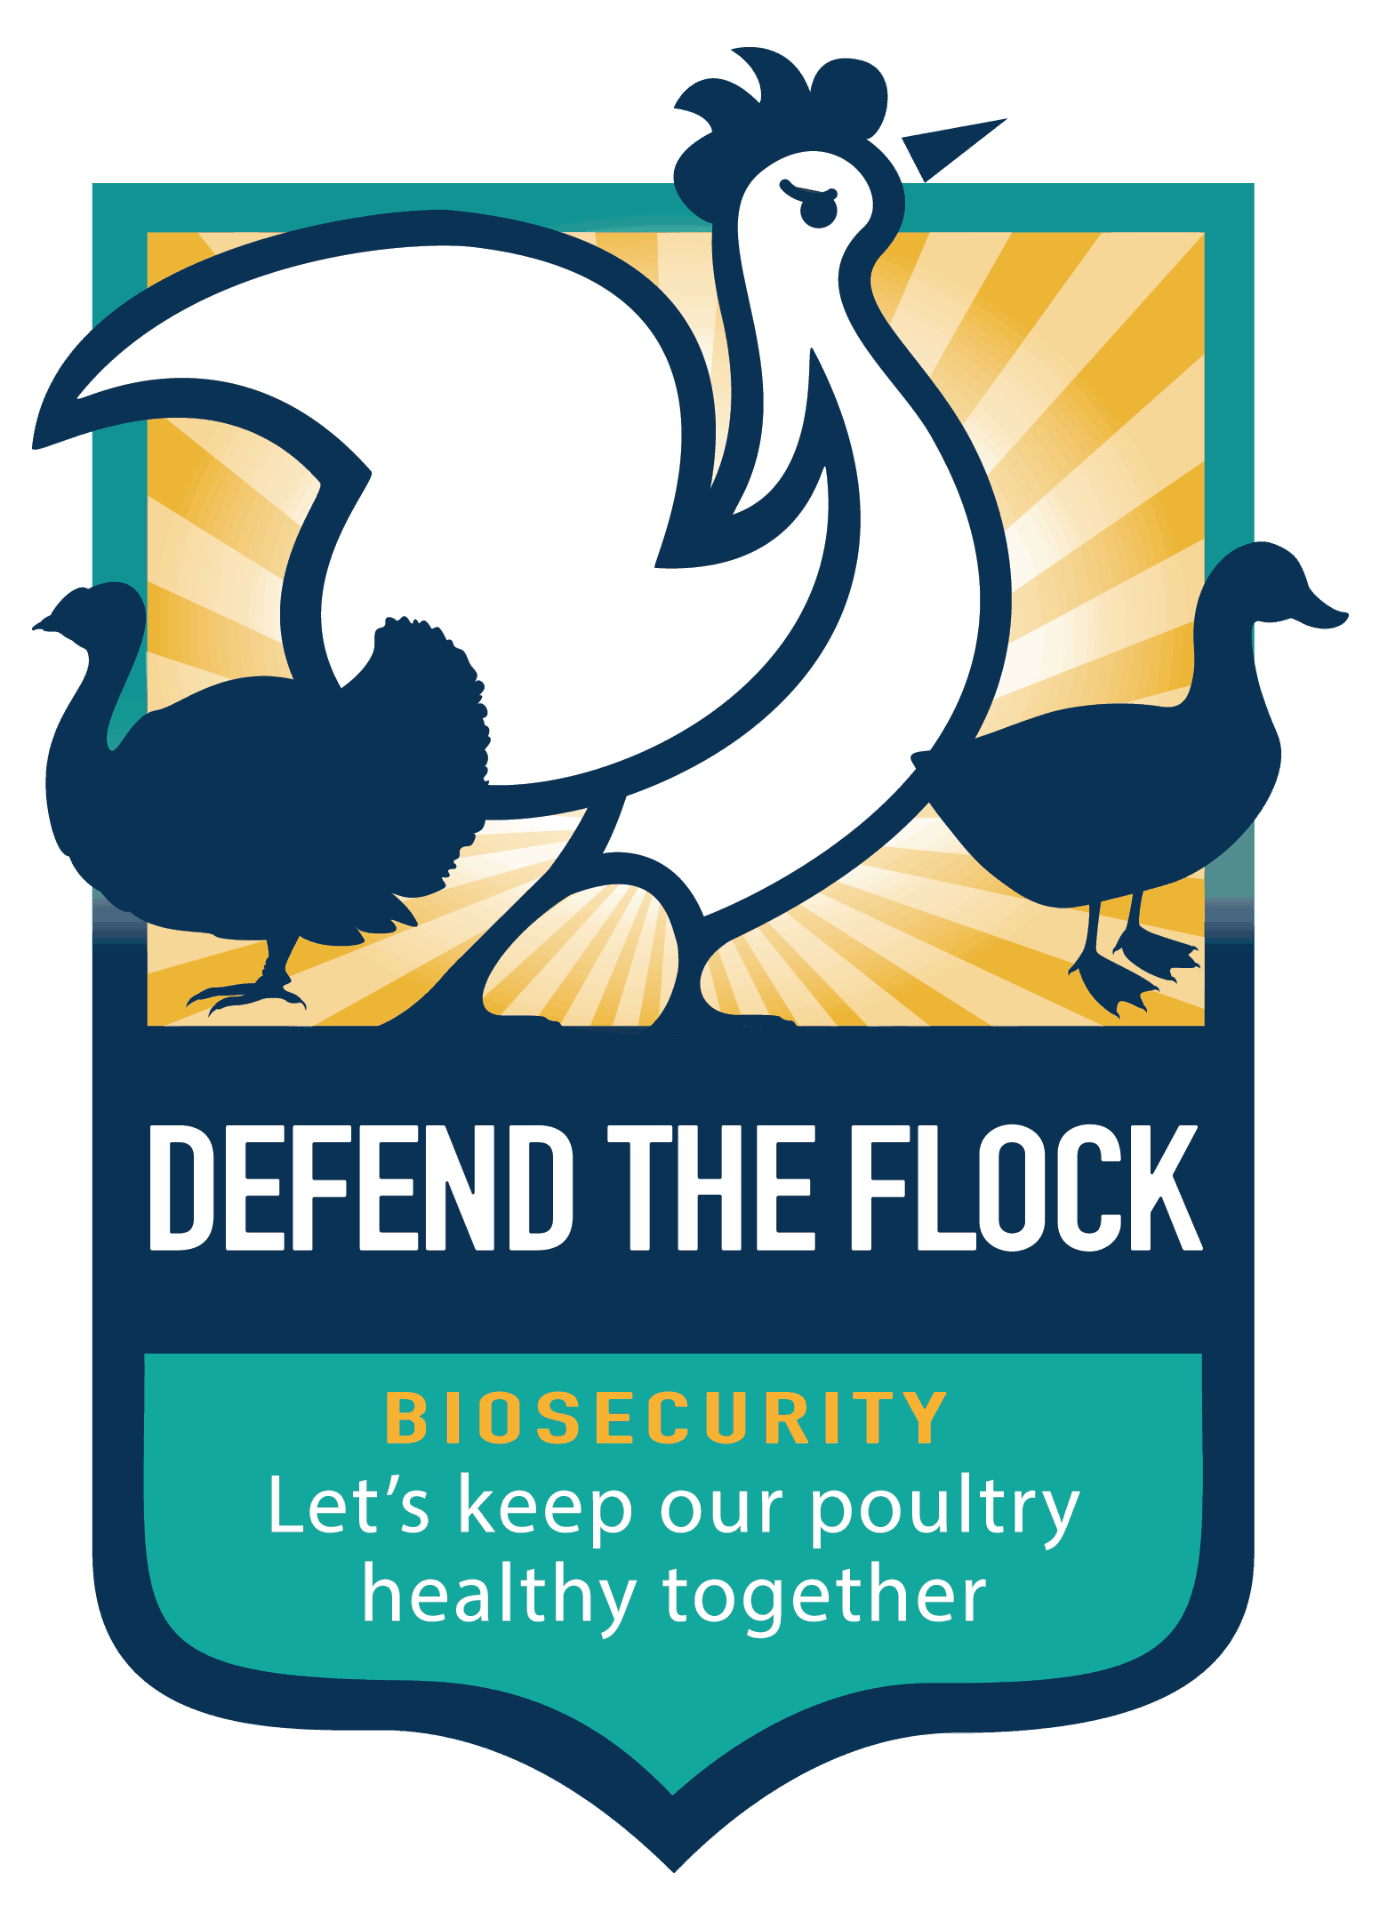 defend-the-flock-usda-campaign-aims-to-protect-poultry-health-cornell-small-farms